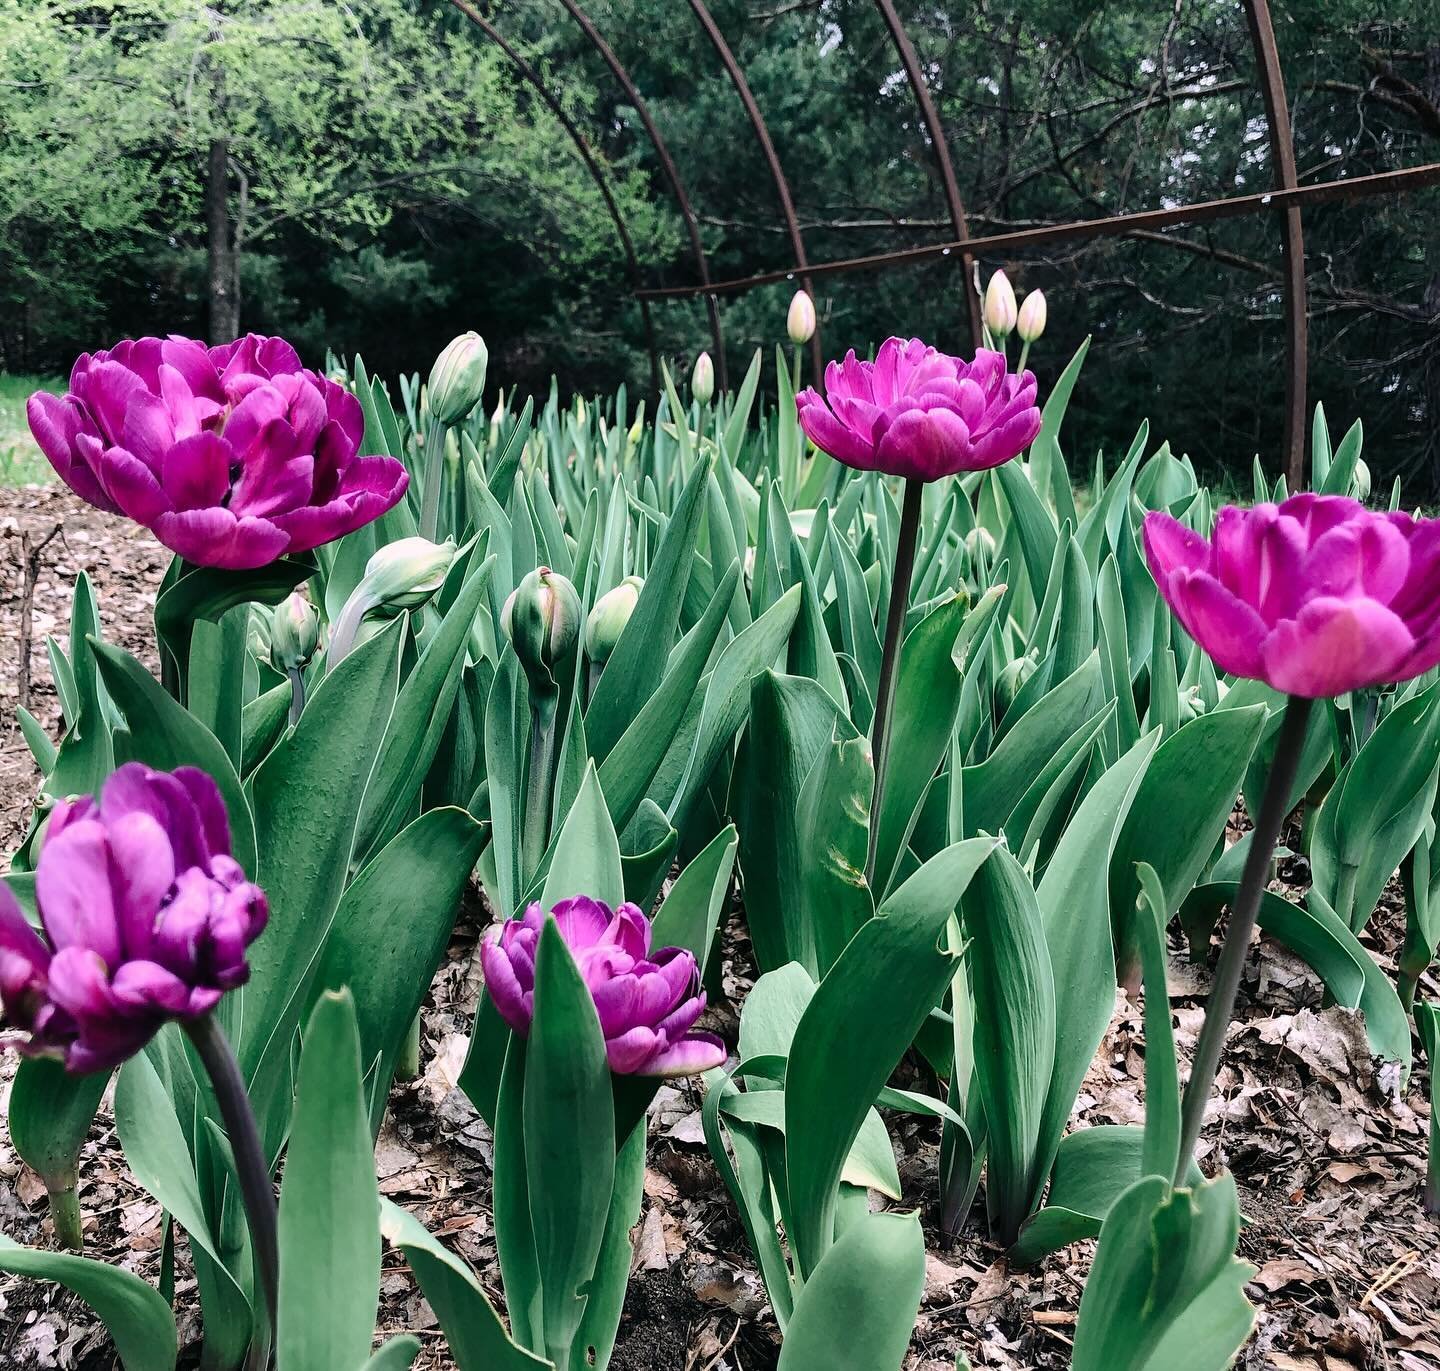 This is what our views will look like very soon! Tulips are all popped through, well hydrated, and will be showing off their unique colors and textures in the next few weeks! 

Have you ordered a @honeydewfieldsmn tulip bouquet yet? Visit our site to